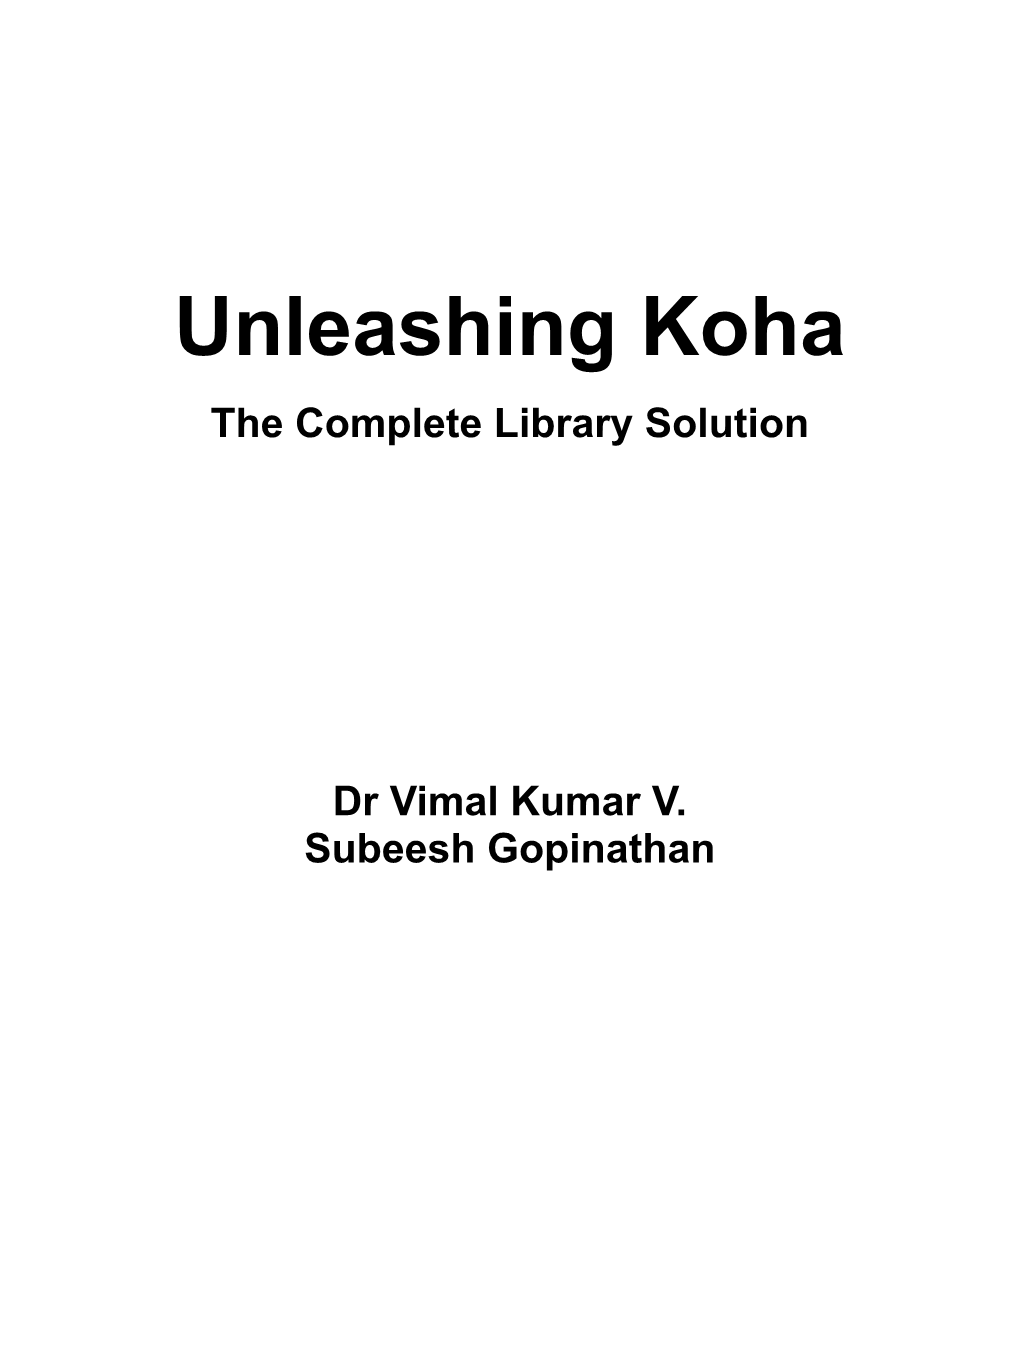 Unleashing Koha the Complete Library Solution